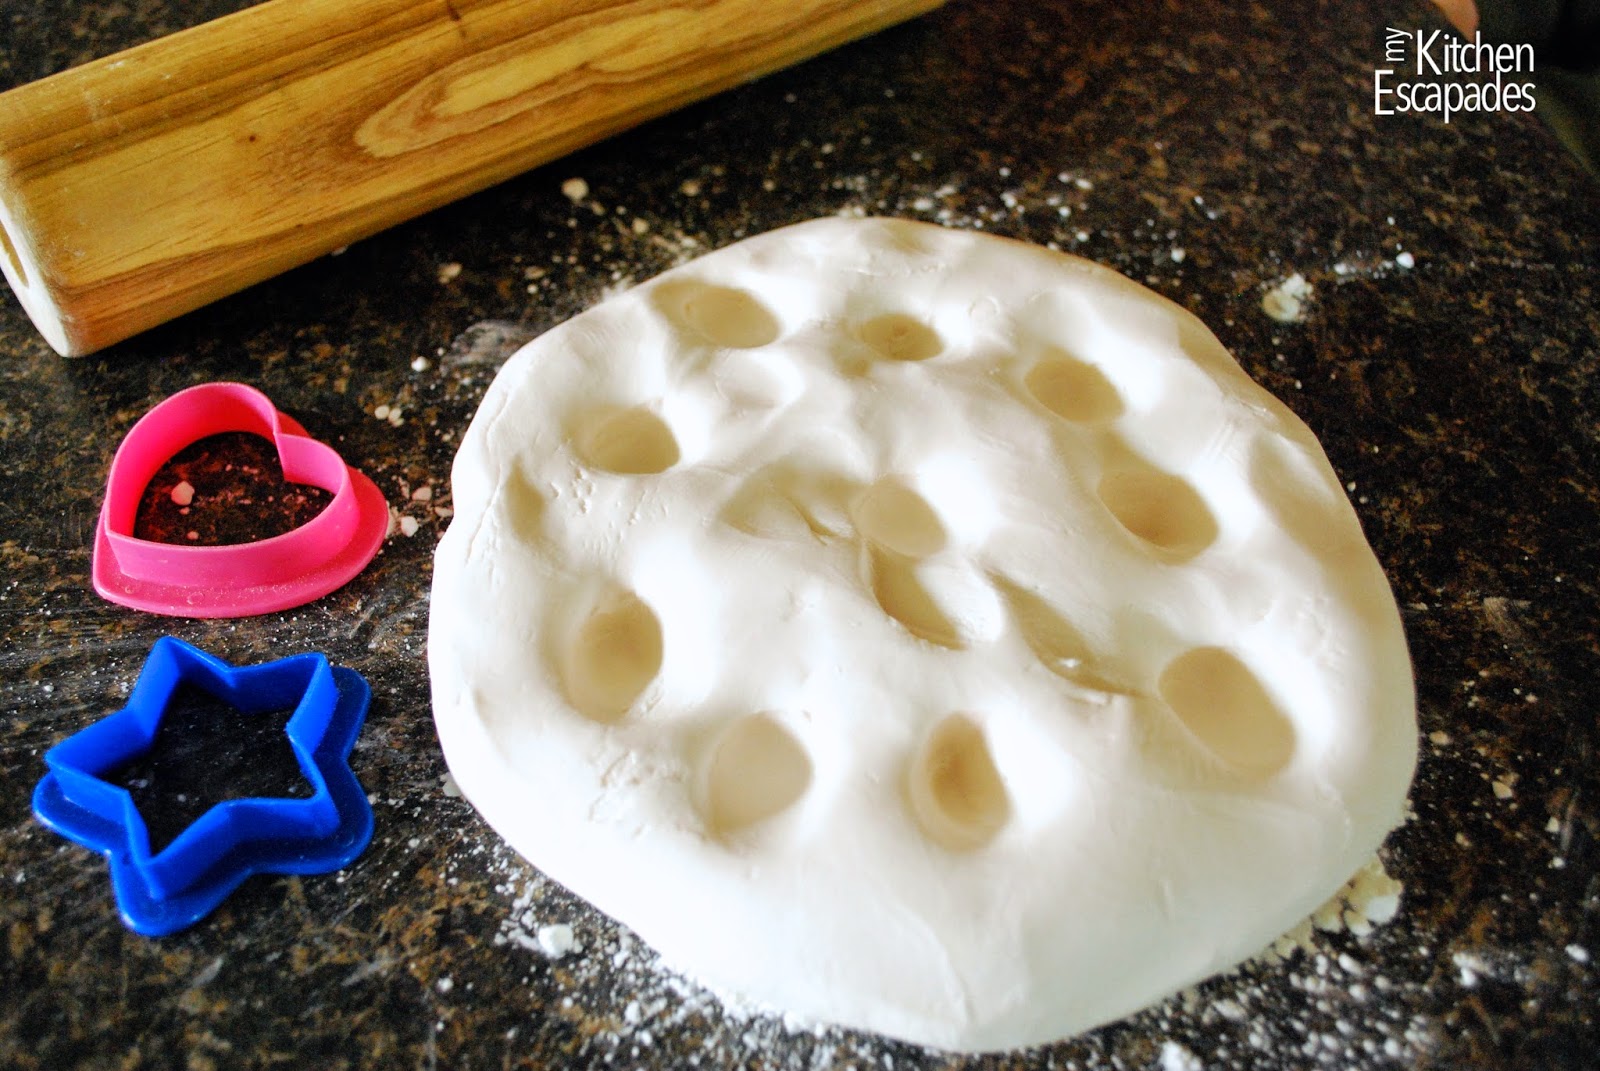 Make silky soft play dough with only two ingredients. Your kids will love it.